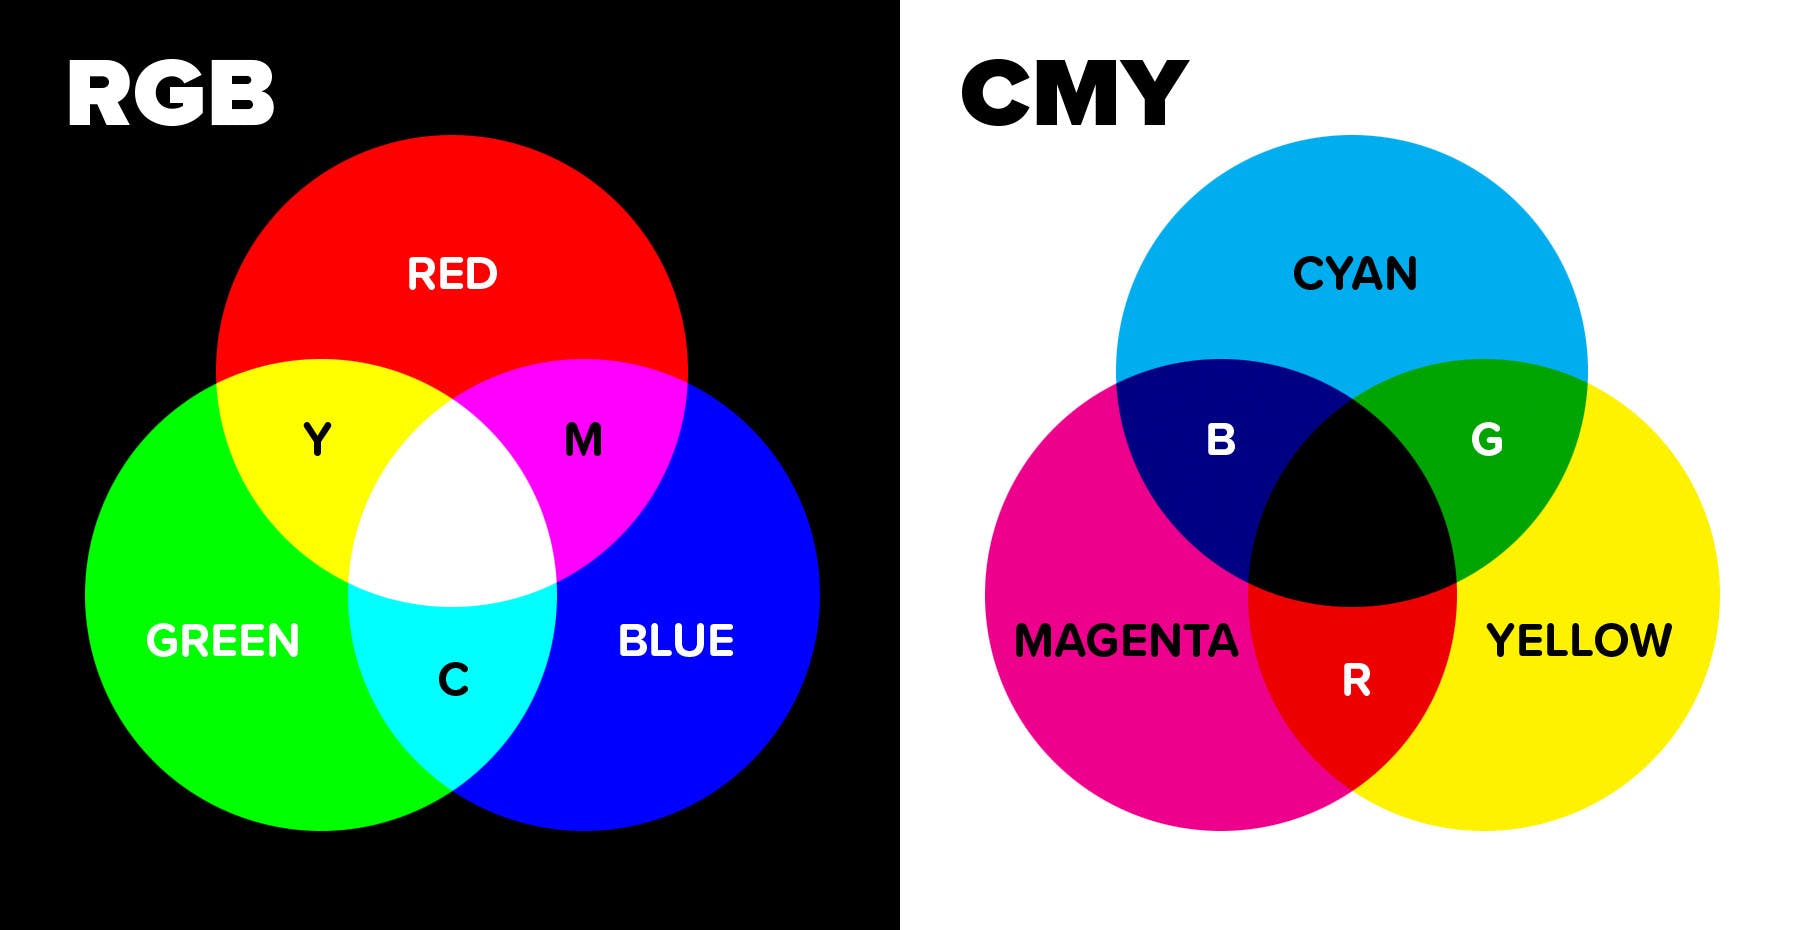 Side-by-side comparison of RGB vs CMY color models